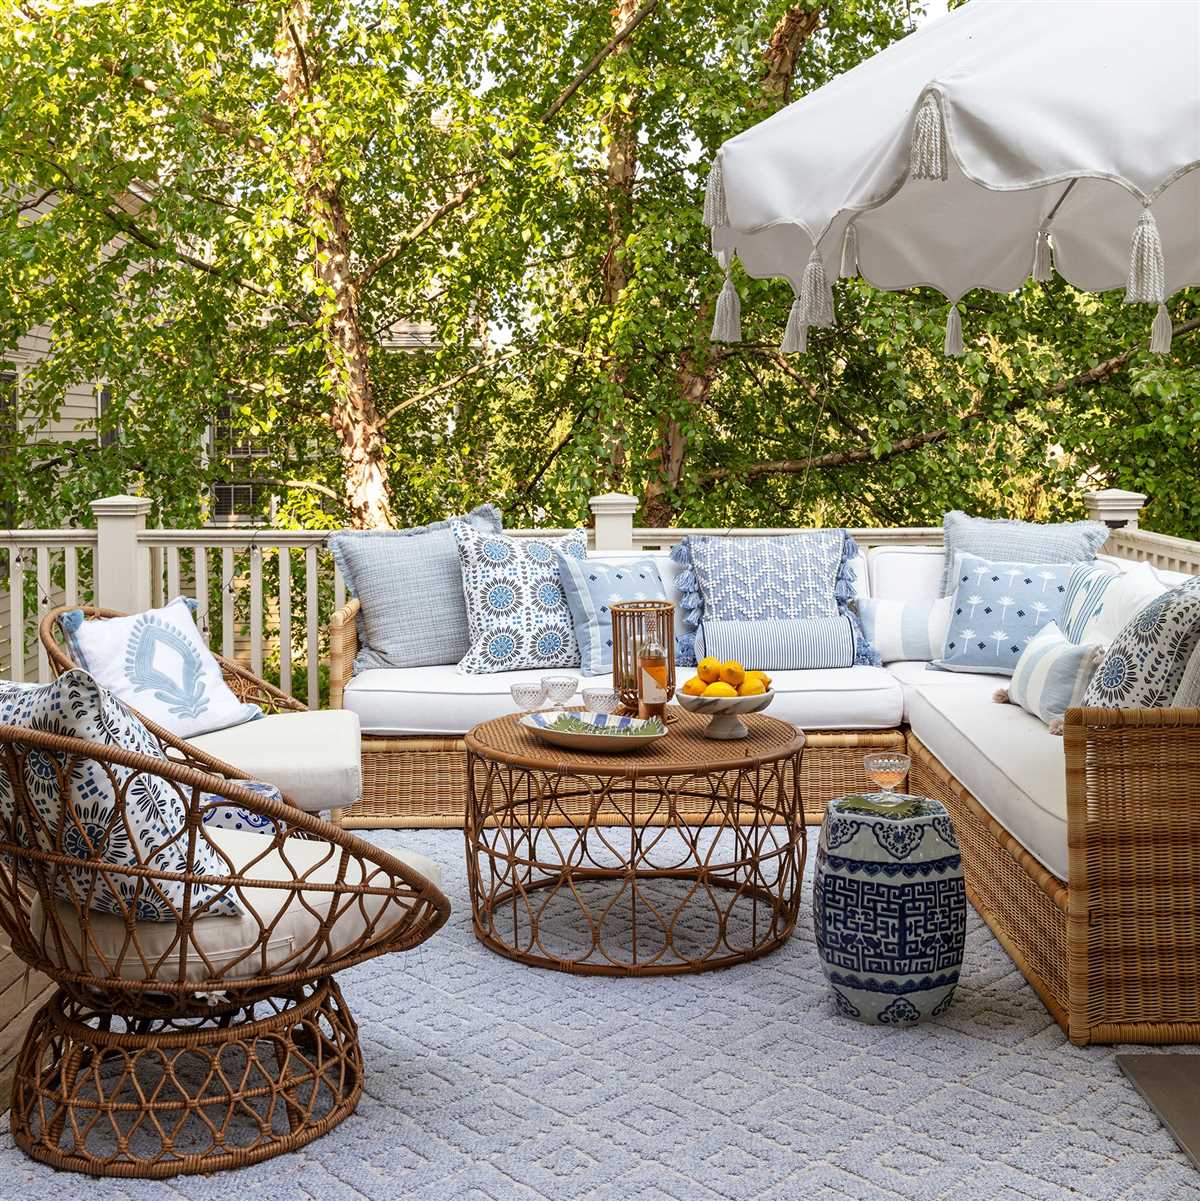 Why Use Vinegar for Cleaning Patio Furniture